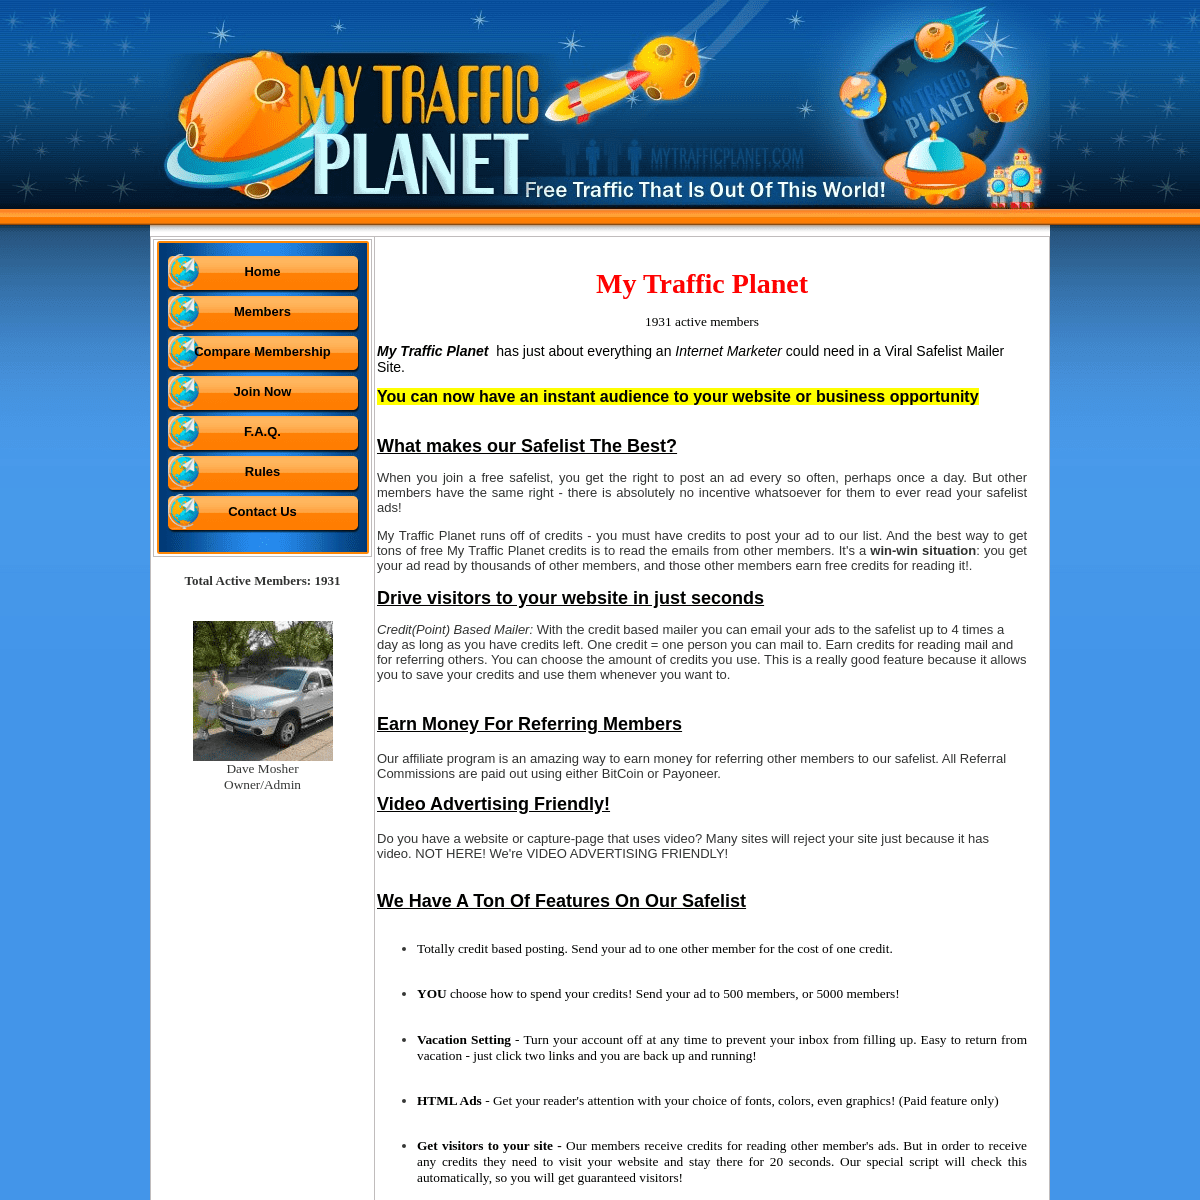 A complete backup of mytrafficplanet.com